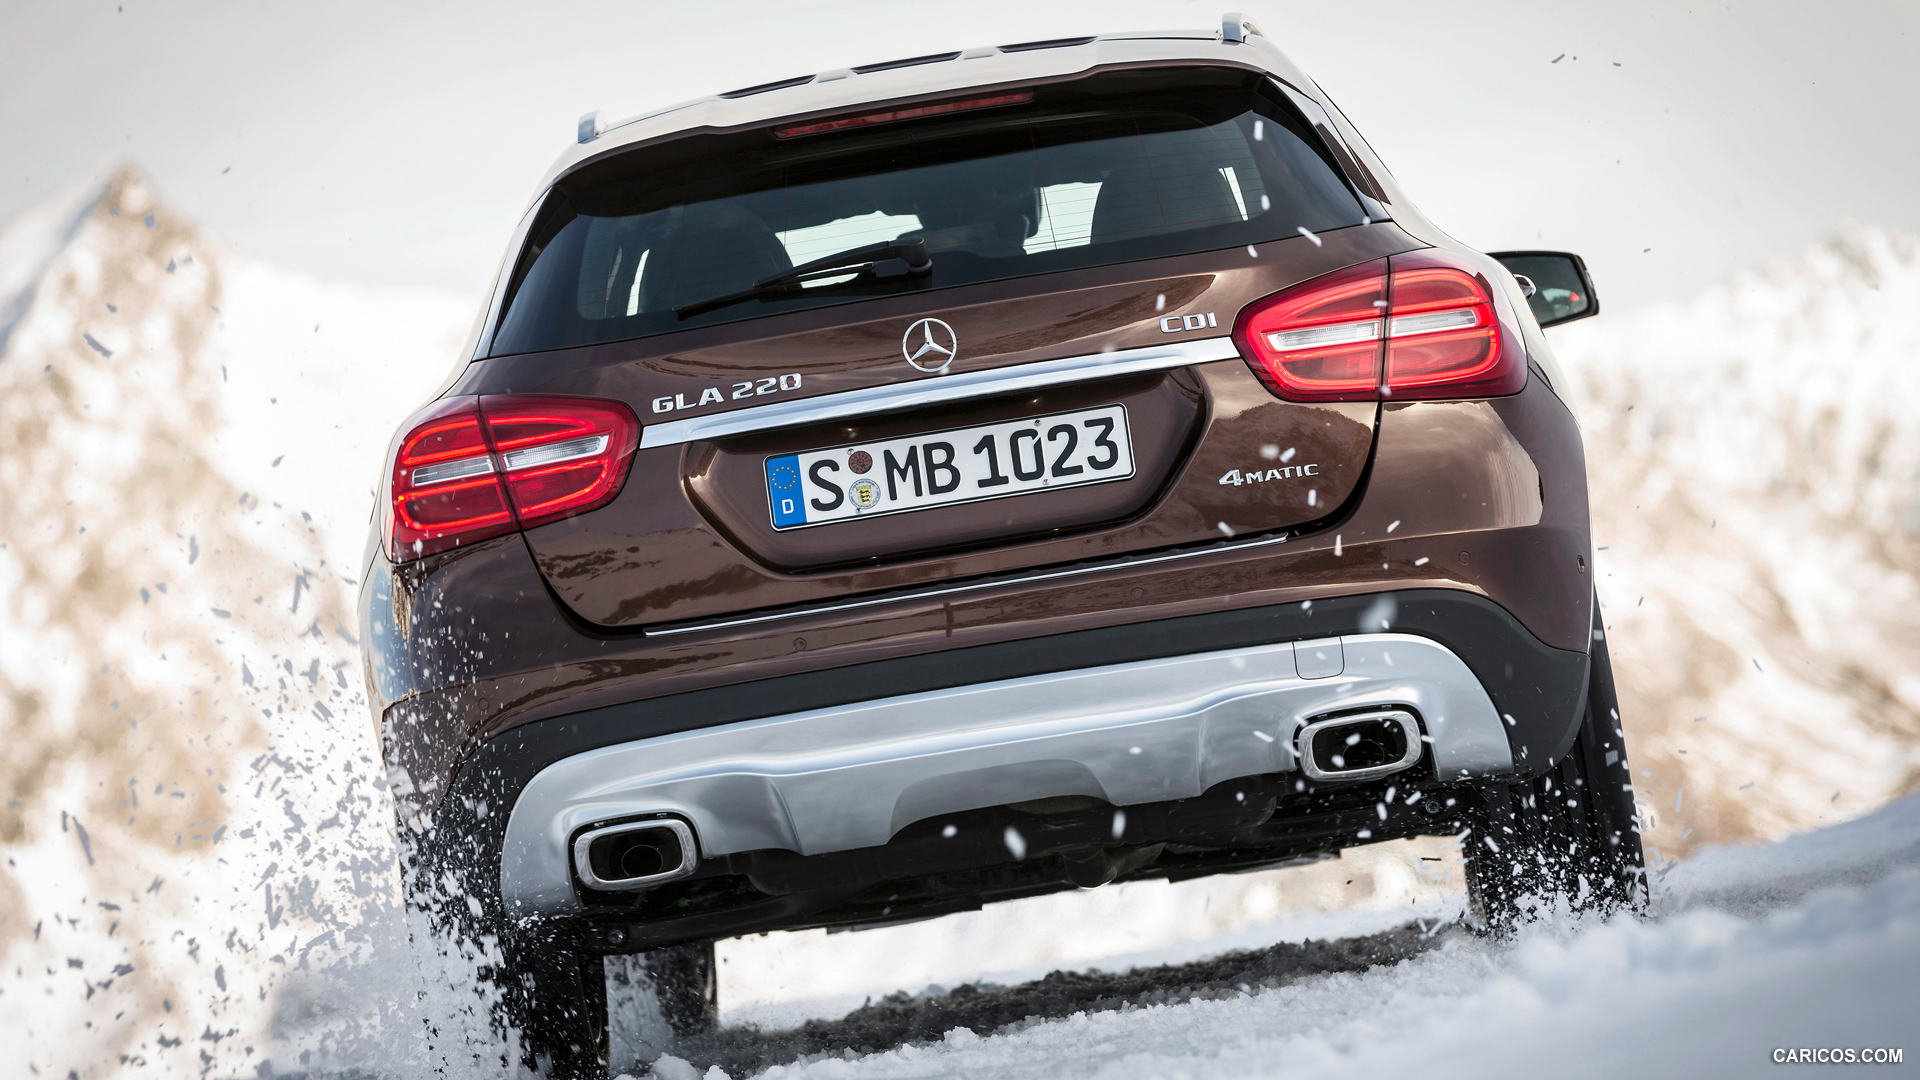 2015 Mercedes-Benz GLA 220 CDI 4MATIC - In Snow - Rear, #60 of 71